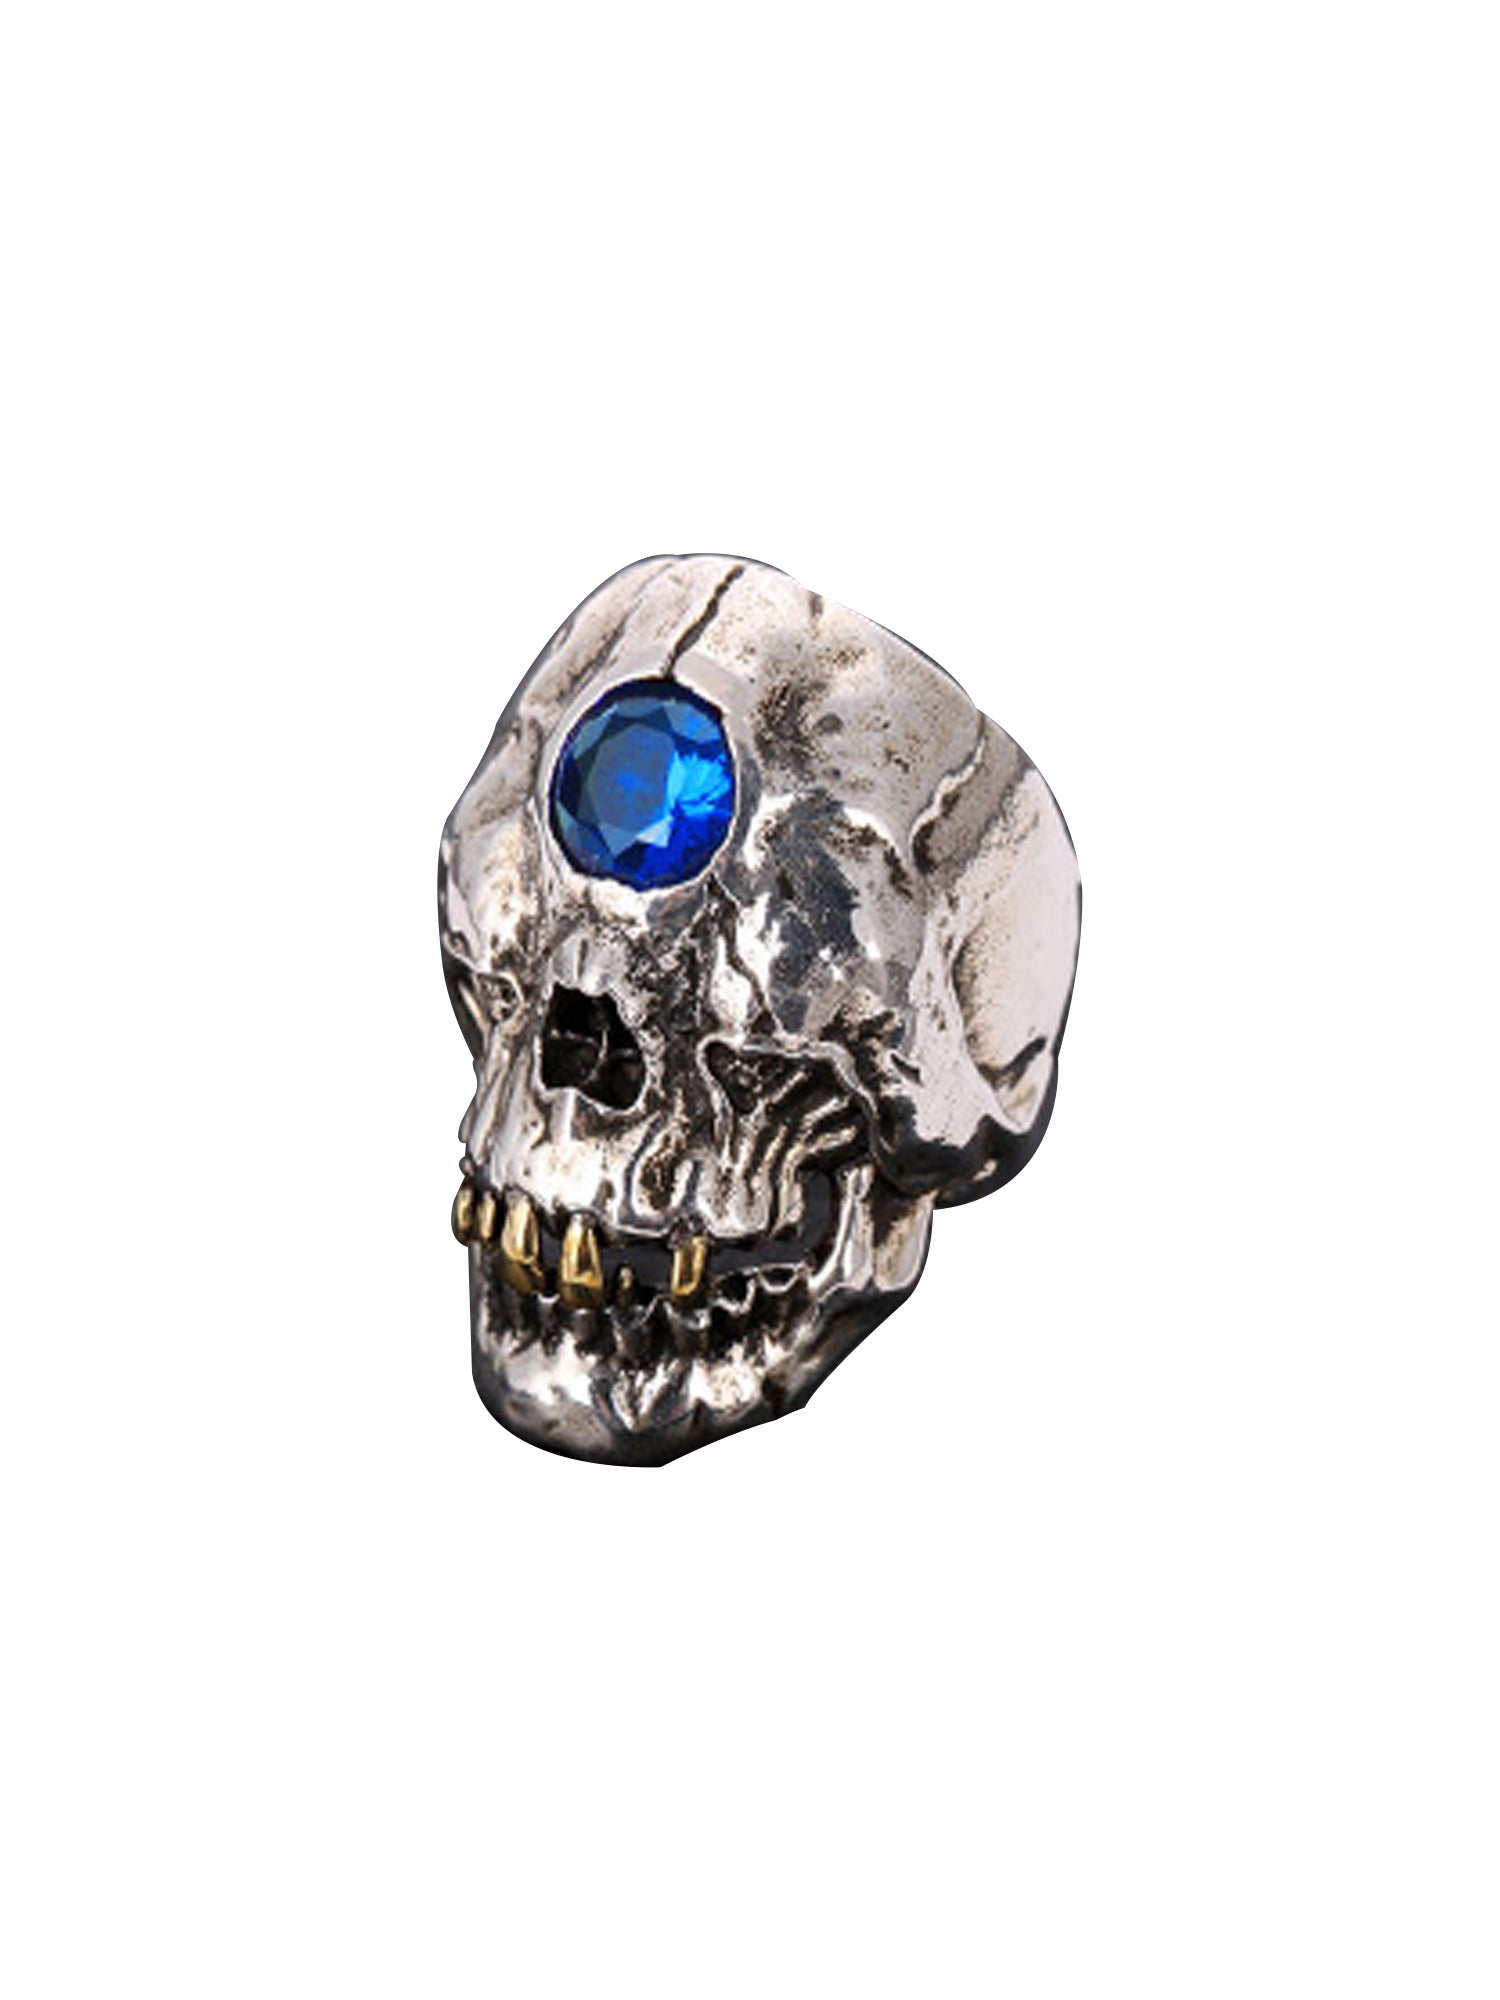 Skull Ring with Blue Gemstone and Gold Teeth - US Size 13